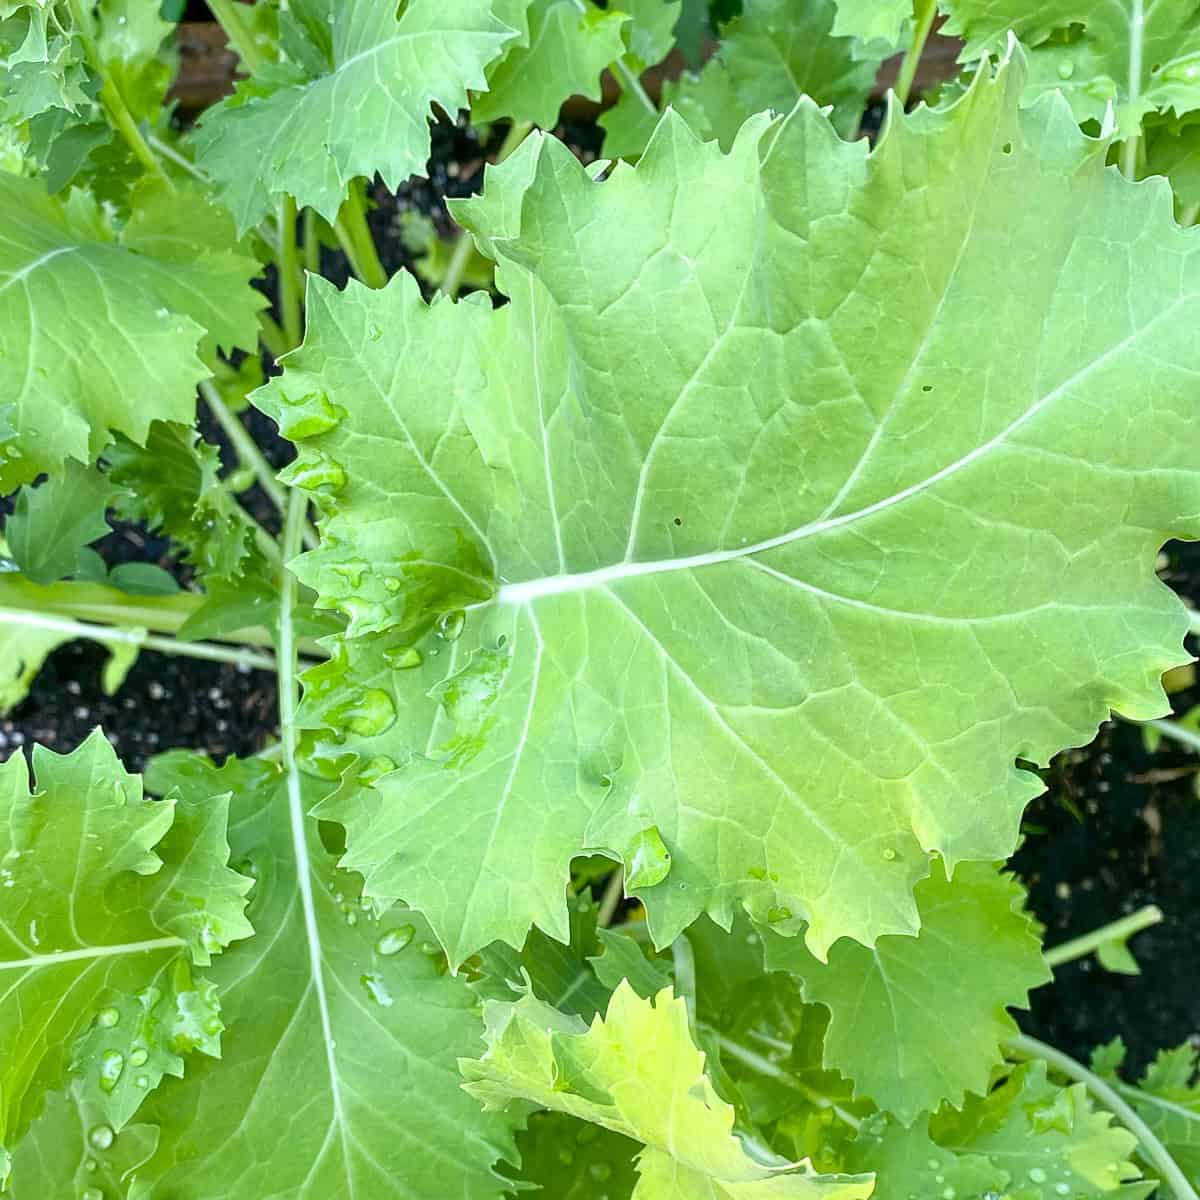 An image of Abundance Kale growing in a backyard raised bed Square Foot Garden.